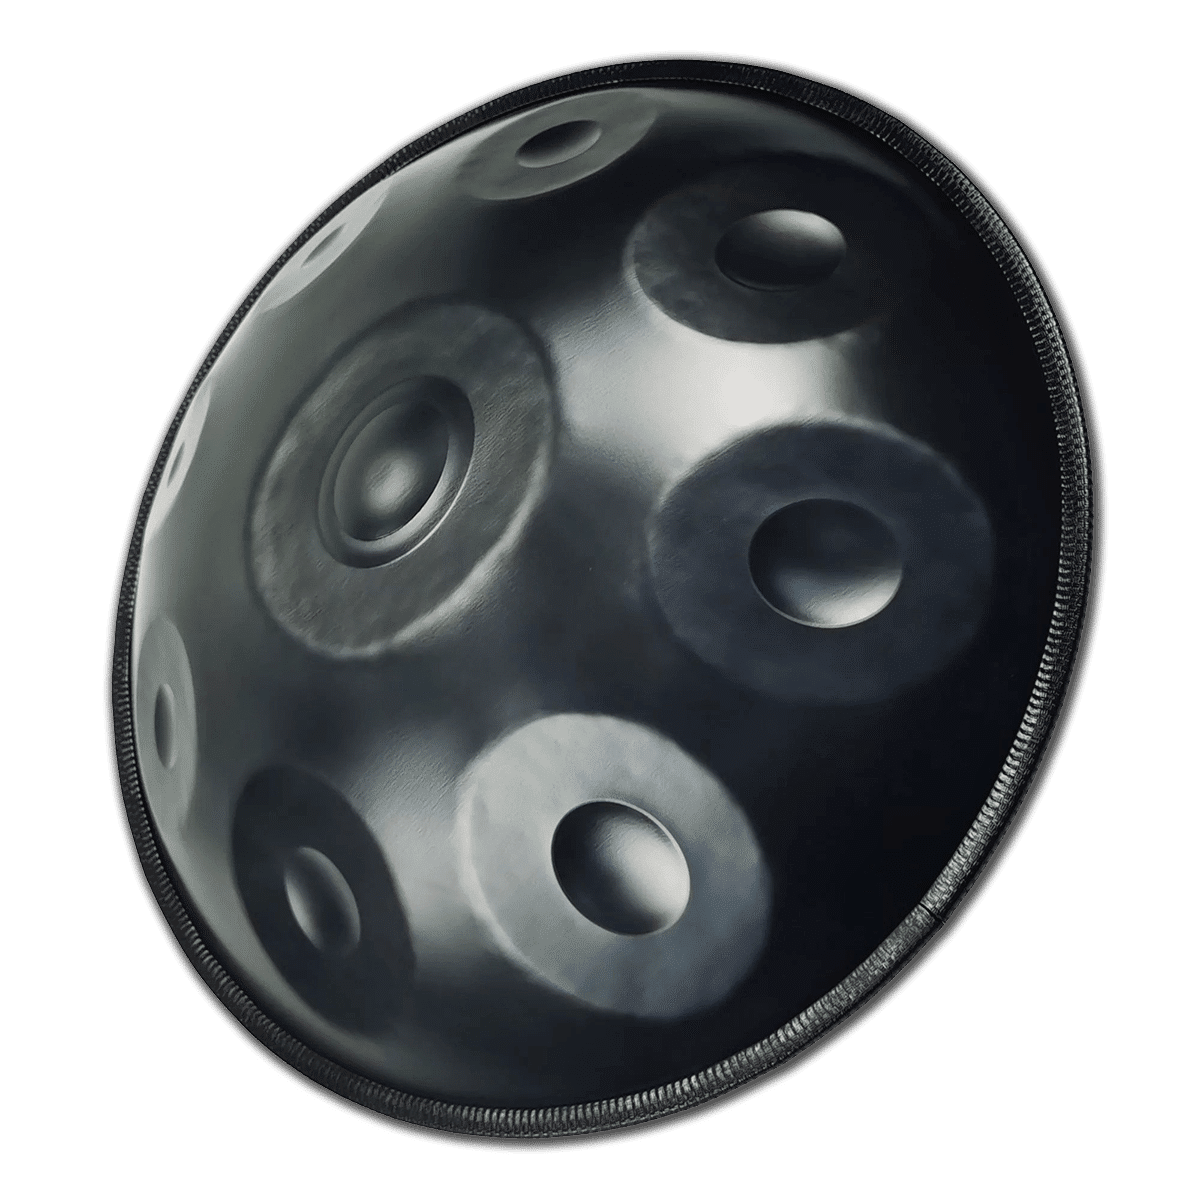 Handpan 9 notes black for sale - Instrument in D minor